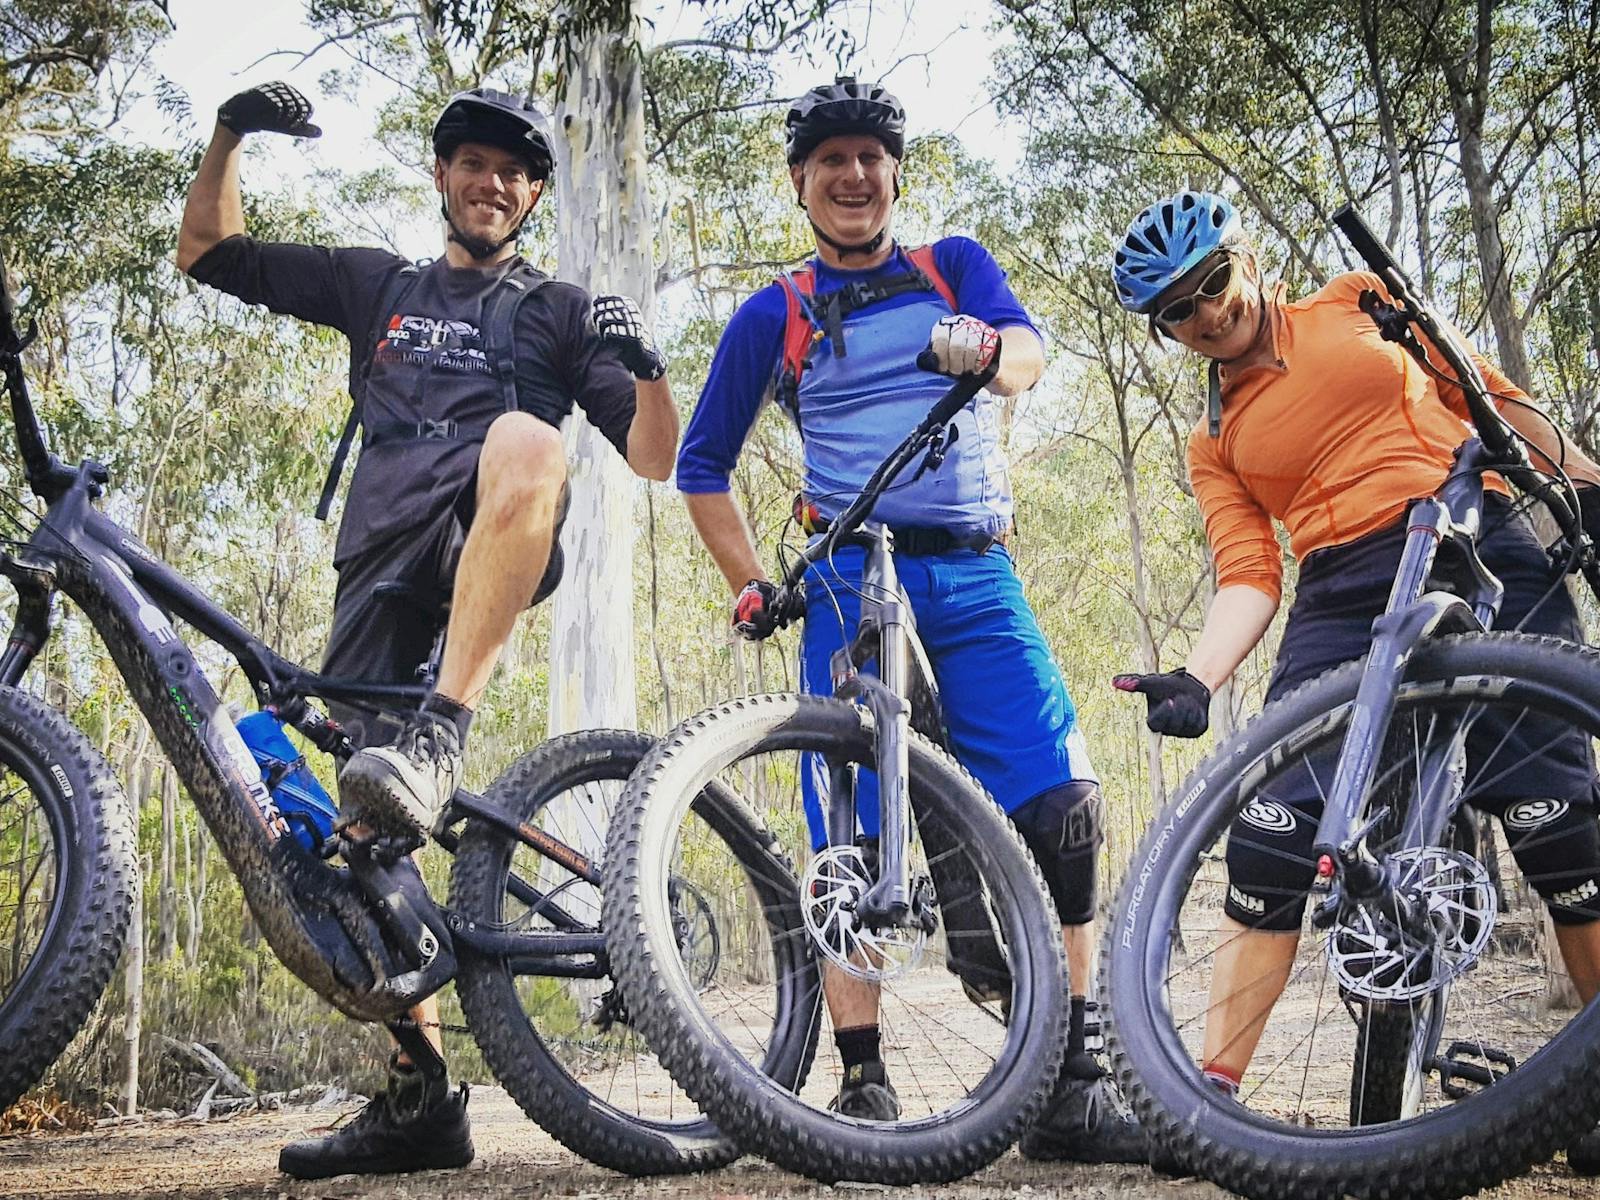 Not just for beginners! Experienced riders loving the freedom of eMTB.